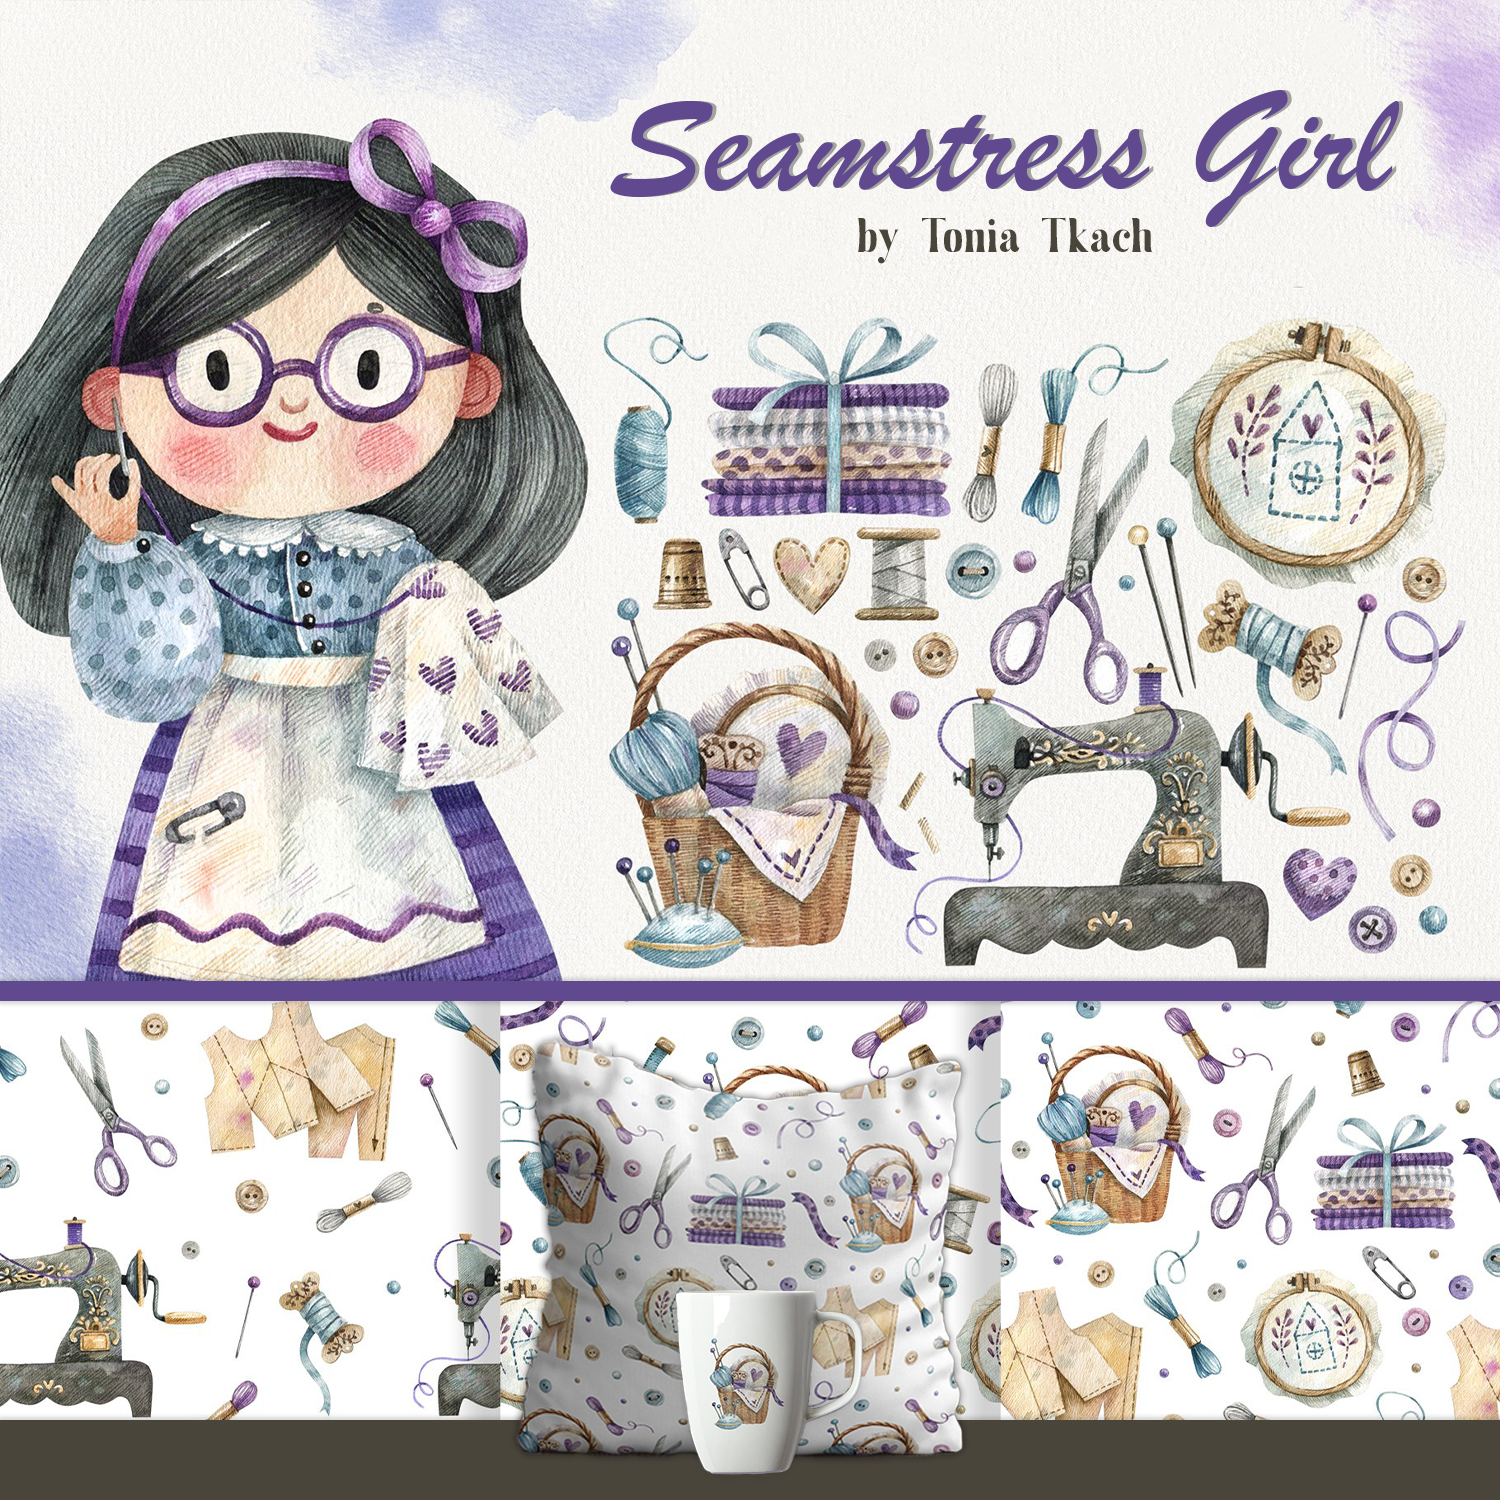 Seamstress girl preview on image.